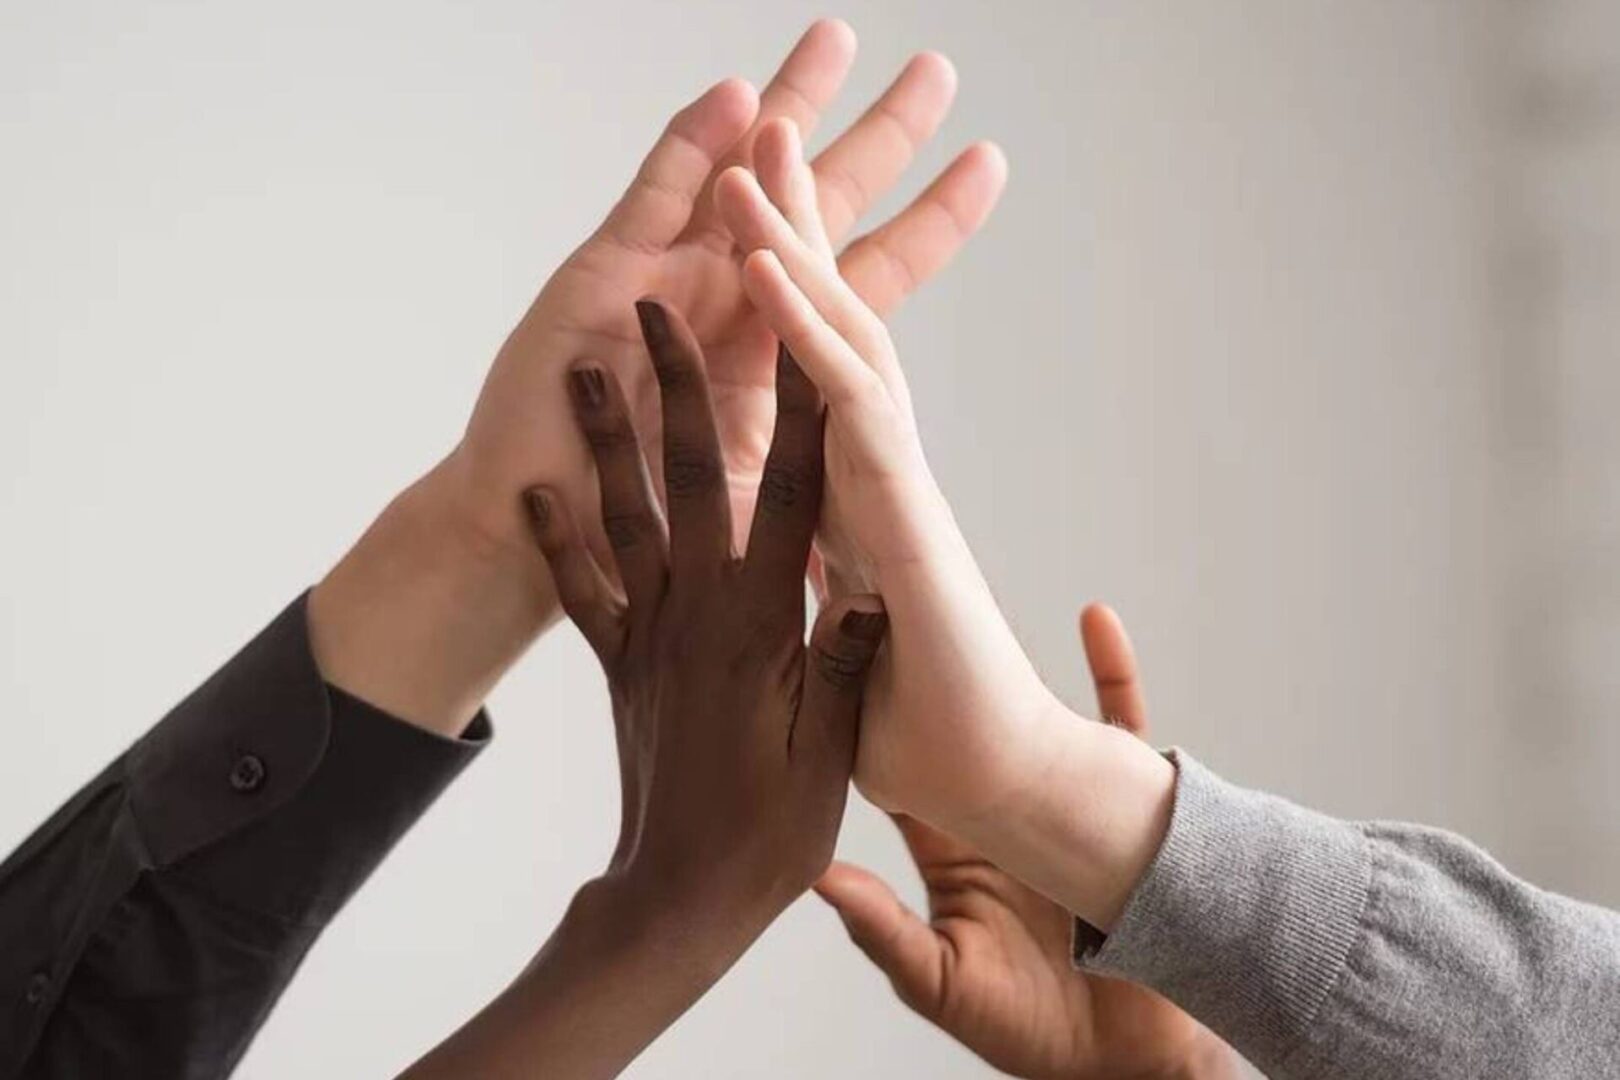 A group of people with their hands together.